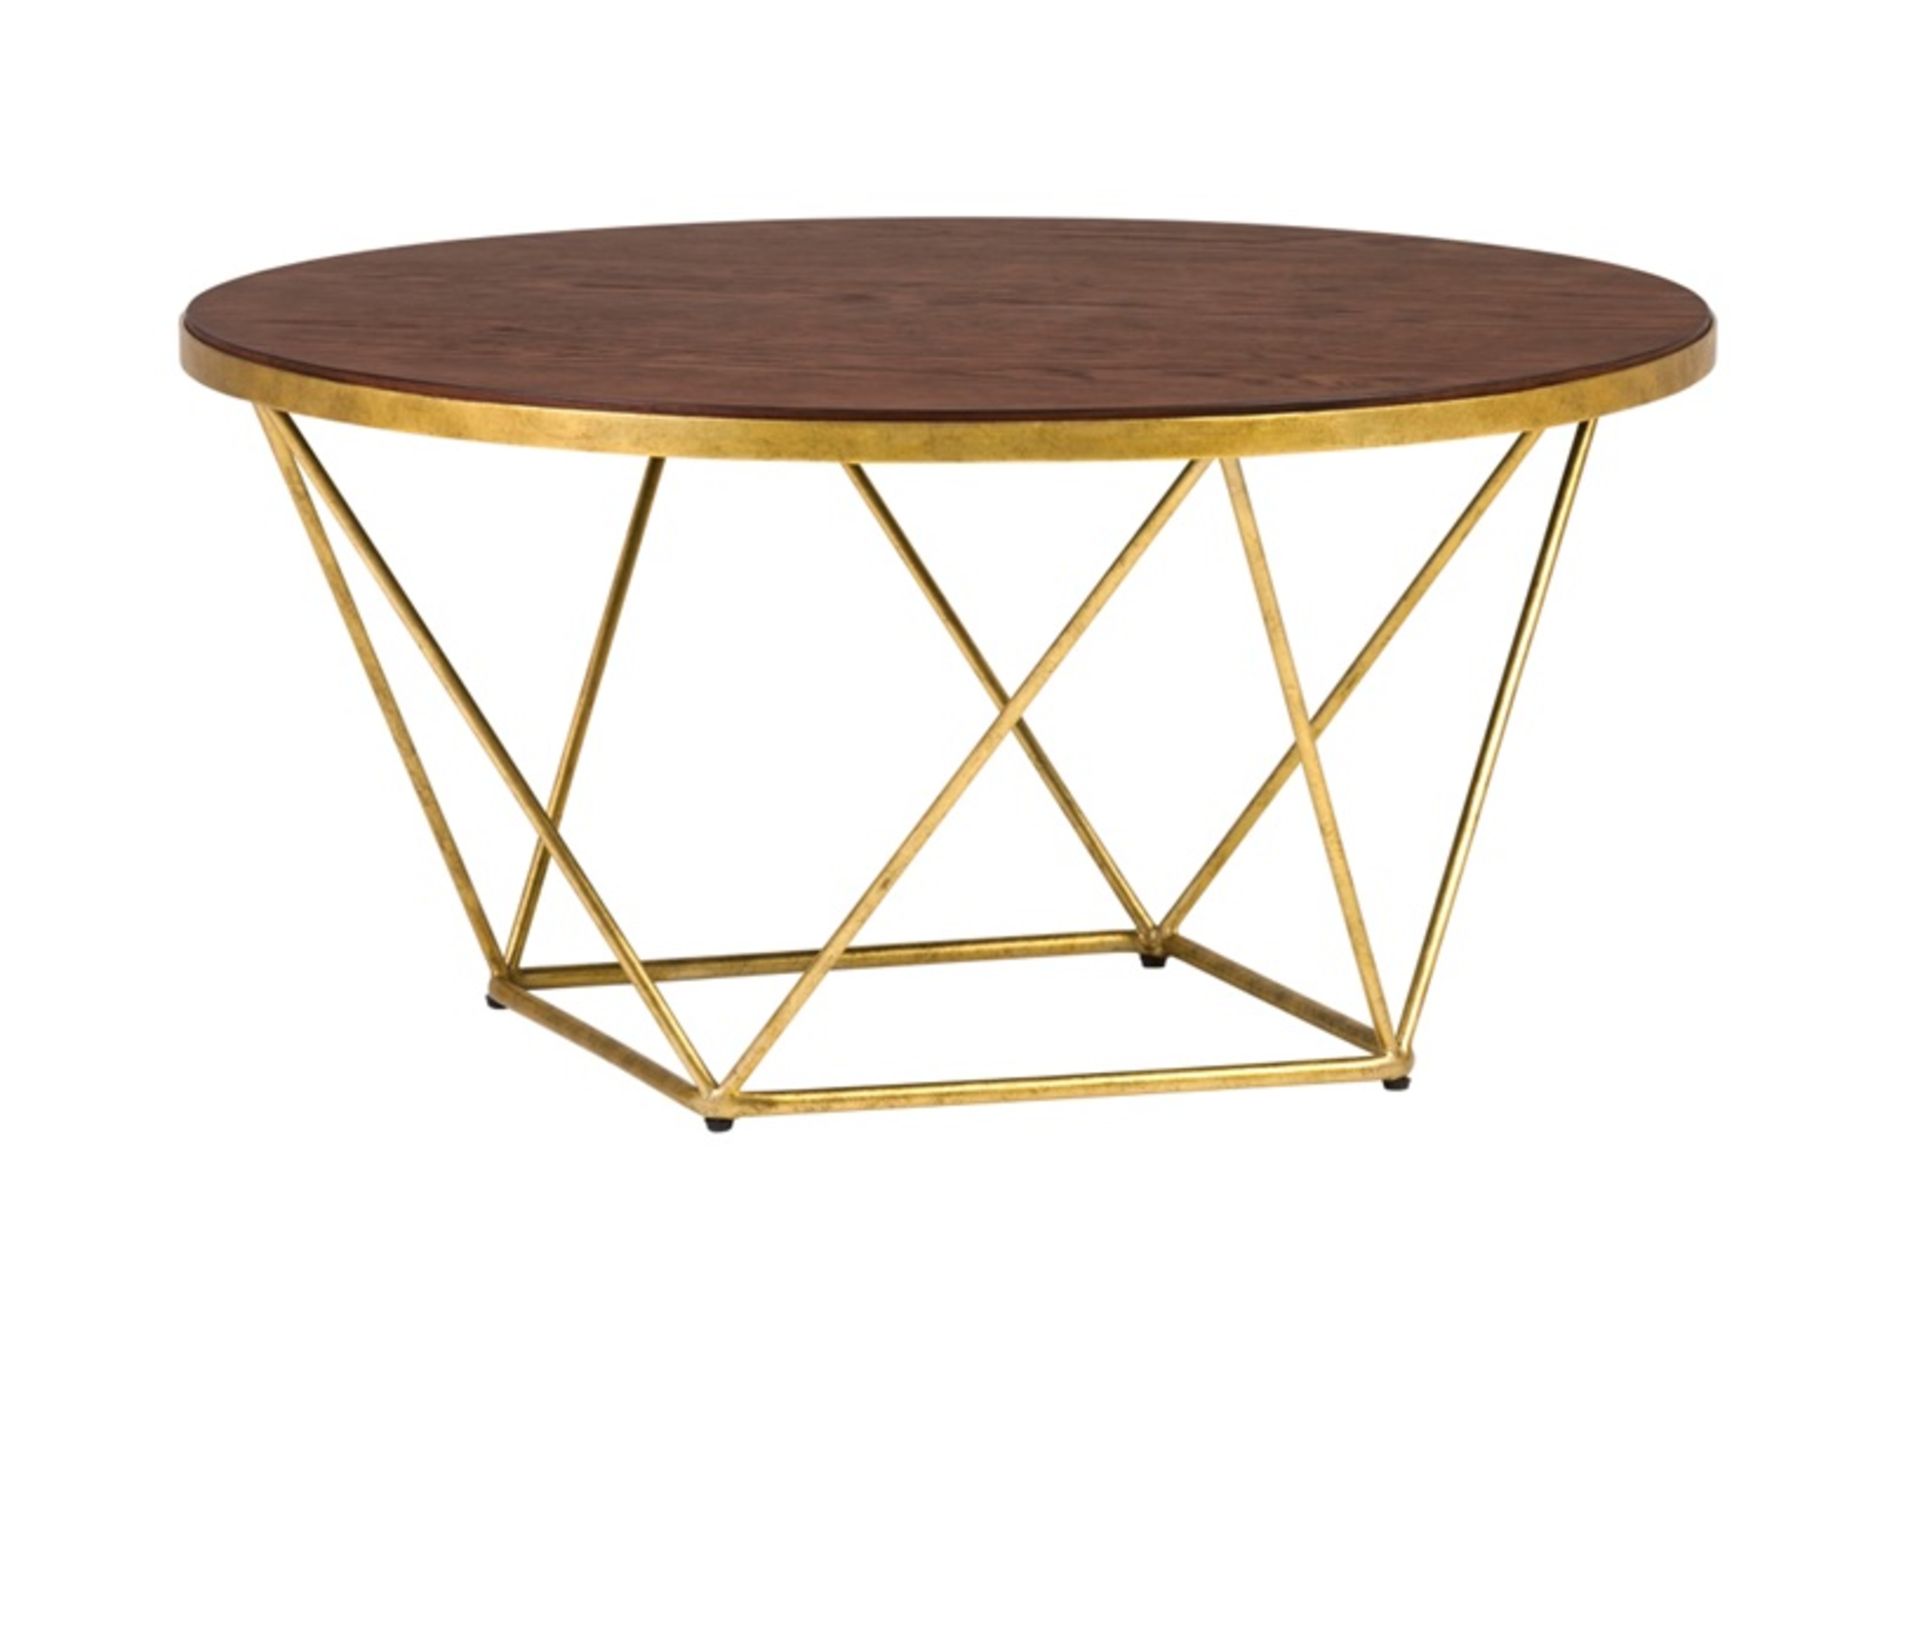 Chaplin Coffee Table- A Stylish Gilt Leafed Contemporary Base Sets Off The Walnut Finish Top To This